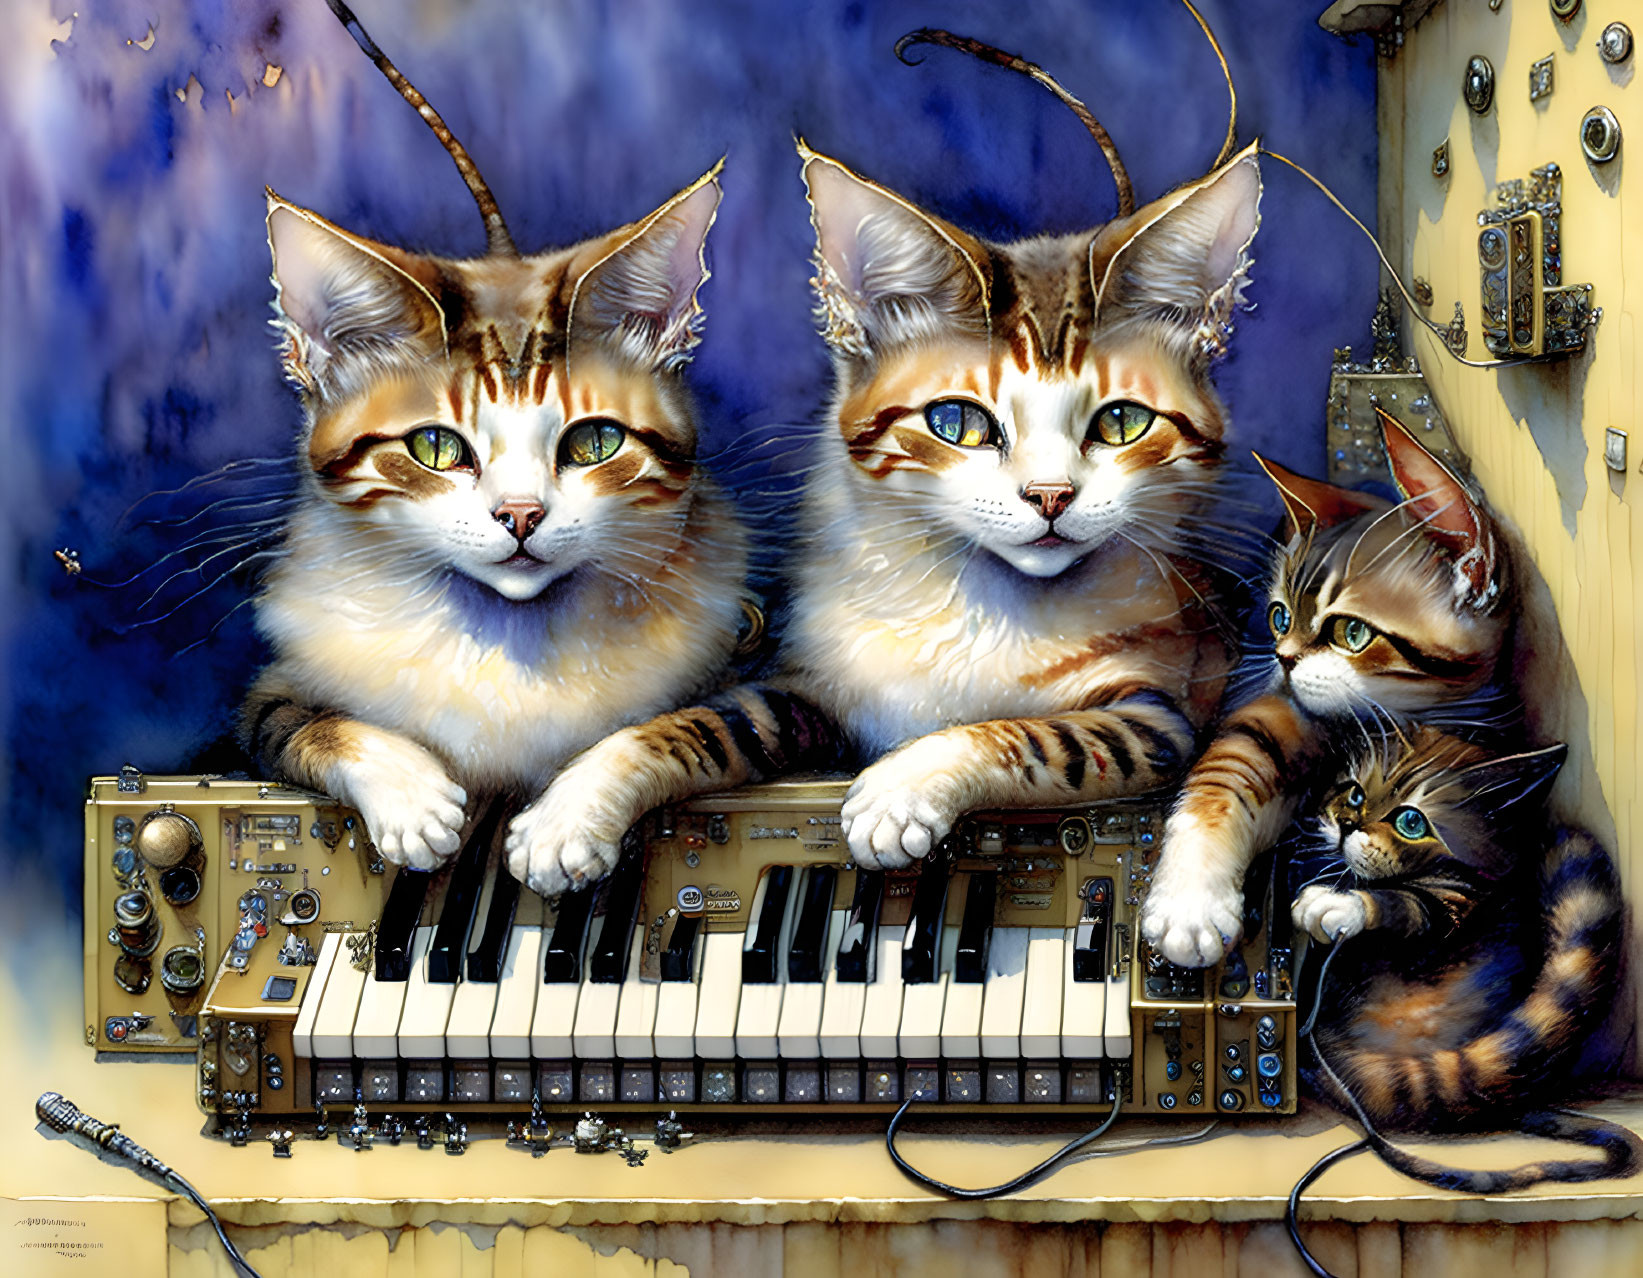 Whimsical humanoid cats playing piano against blue backdrop